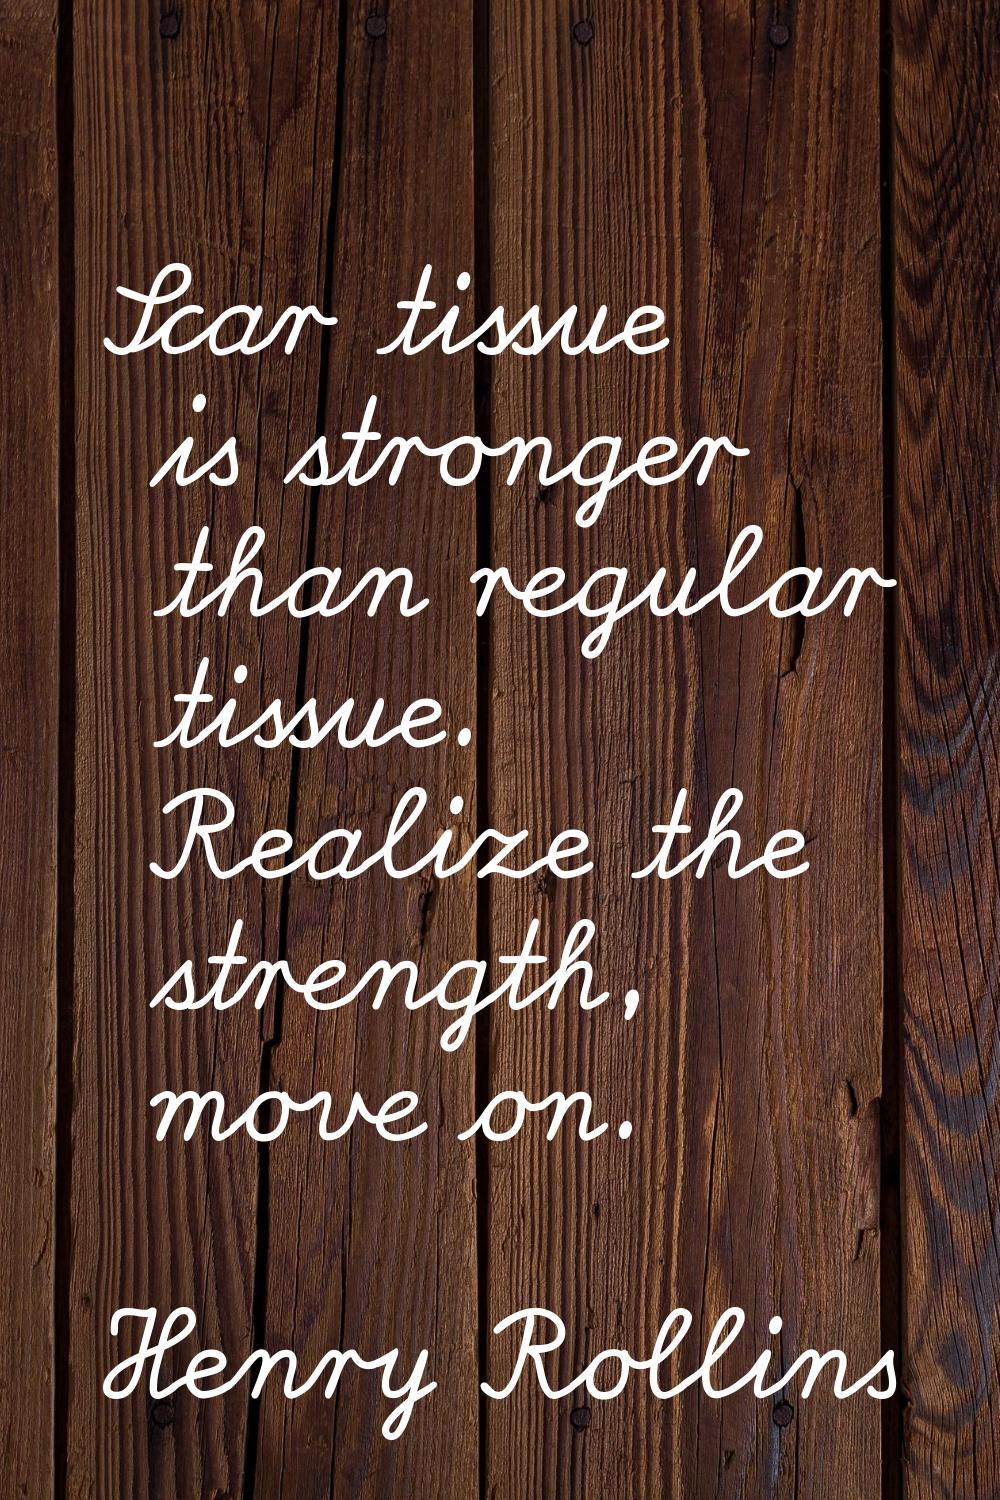 Scar tissue is stronger than regular tissue. Realize the strength, move on.